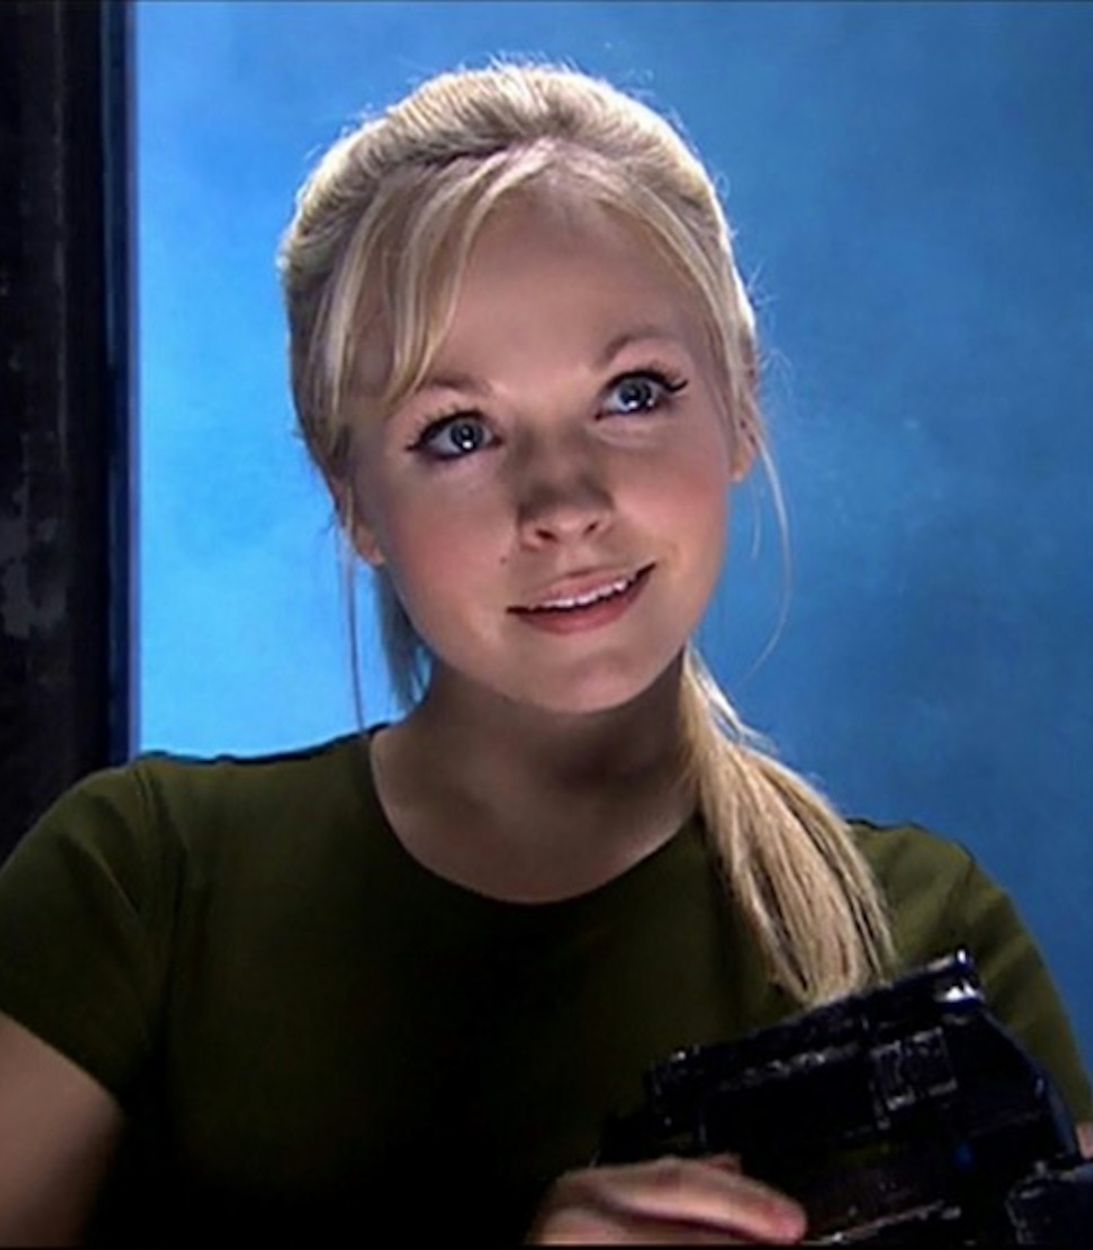 Jenny from Doctor Who 